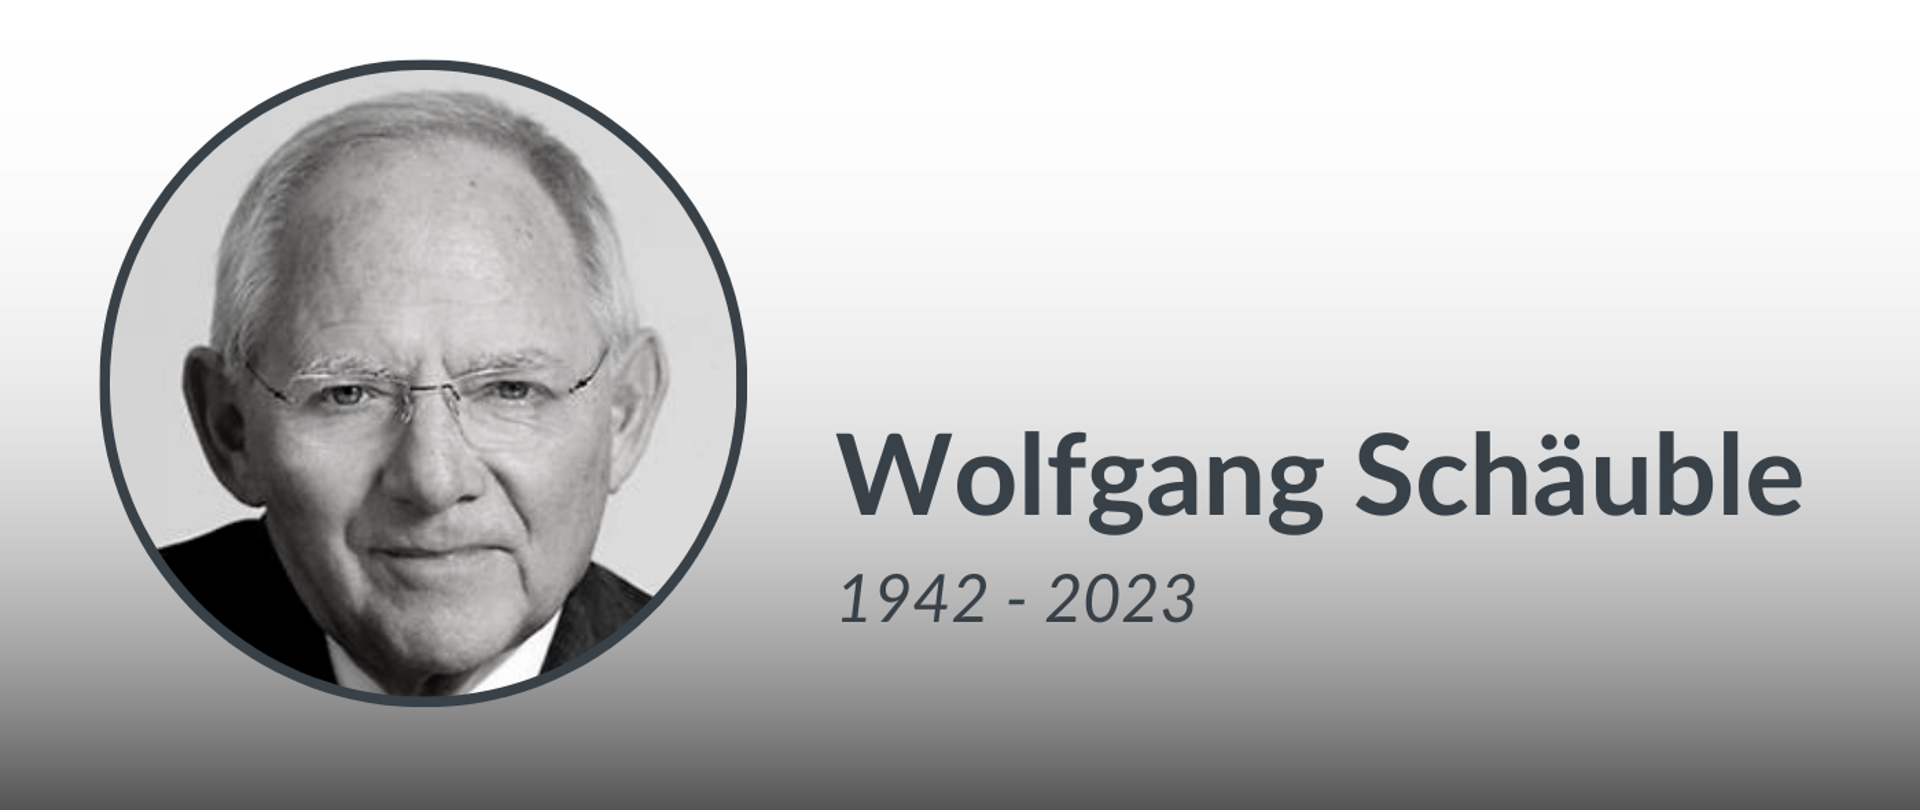 Wolfgang Schäuble, proponent of Polish-German reconciliation, dies